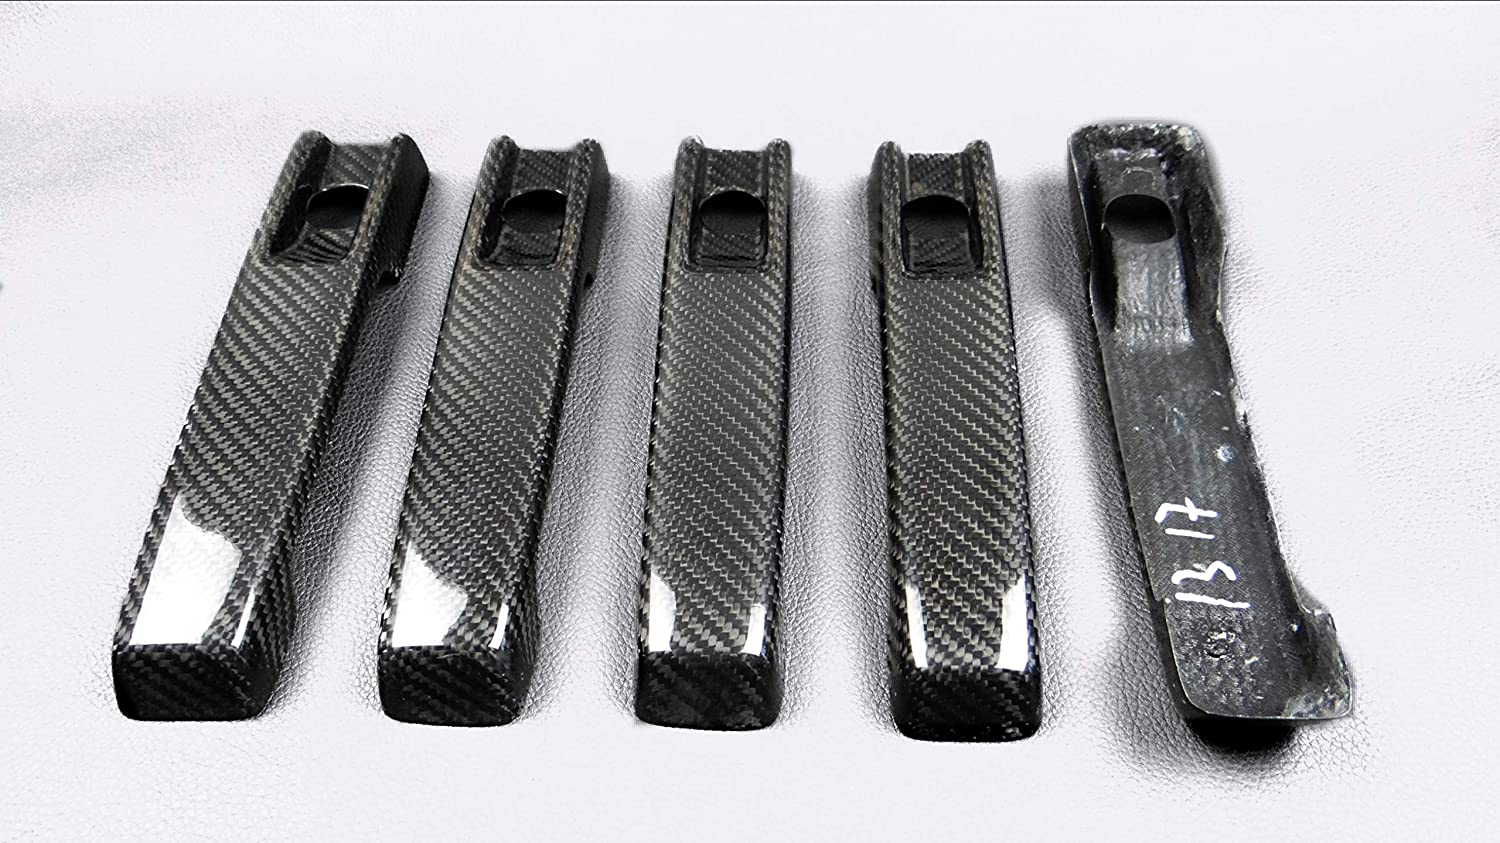 Carbon Door Handle Covers 5 pcs for Mercedes W463 G Wagon